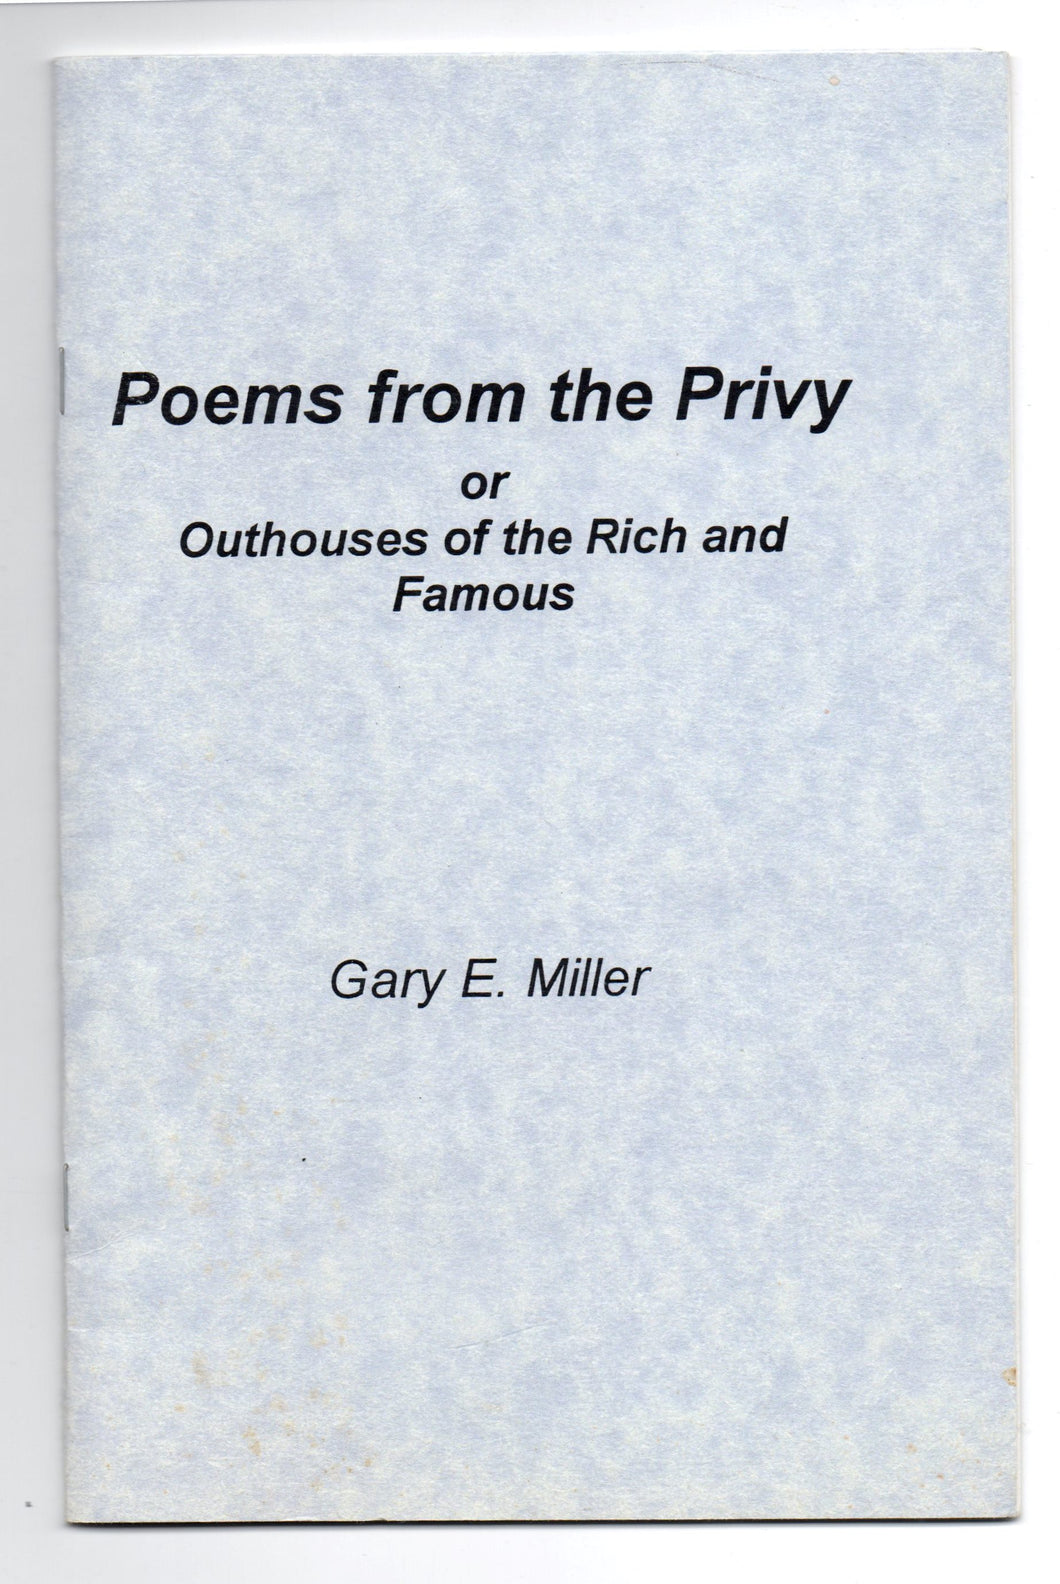 Poems from the Privy or Outhouses of the Rich and Famous